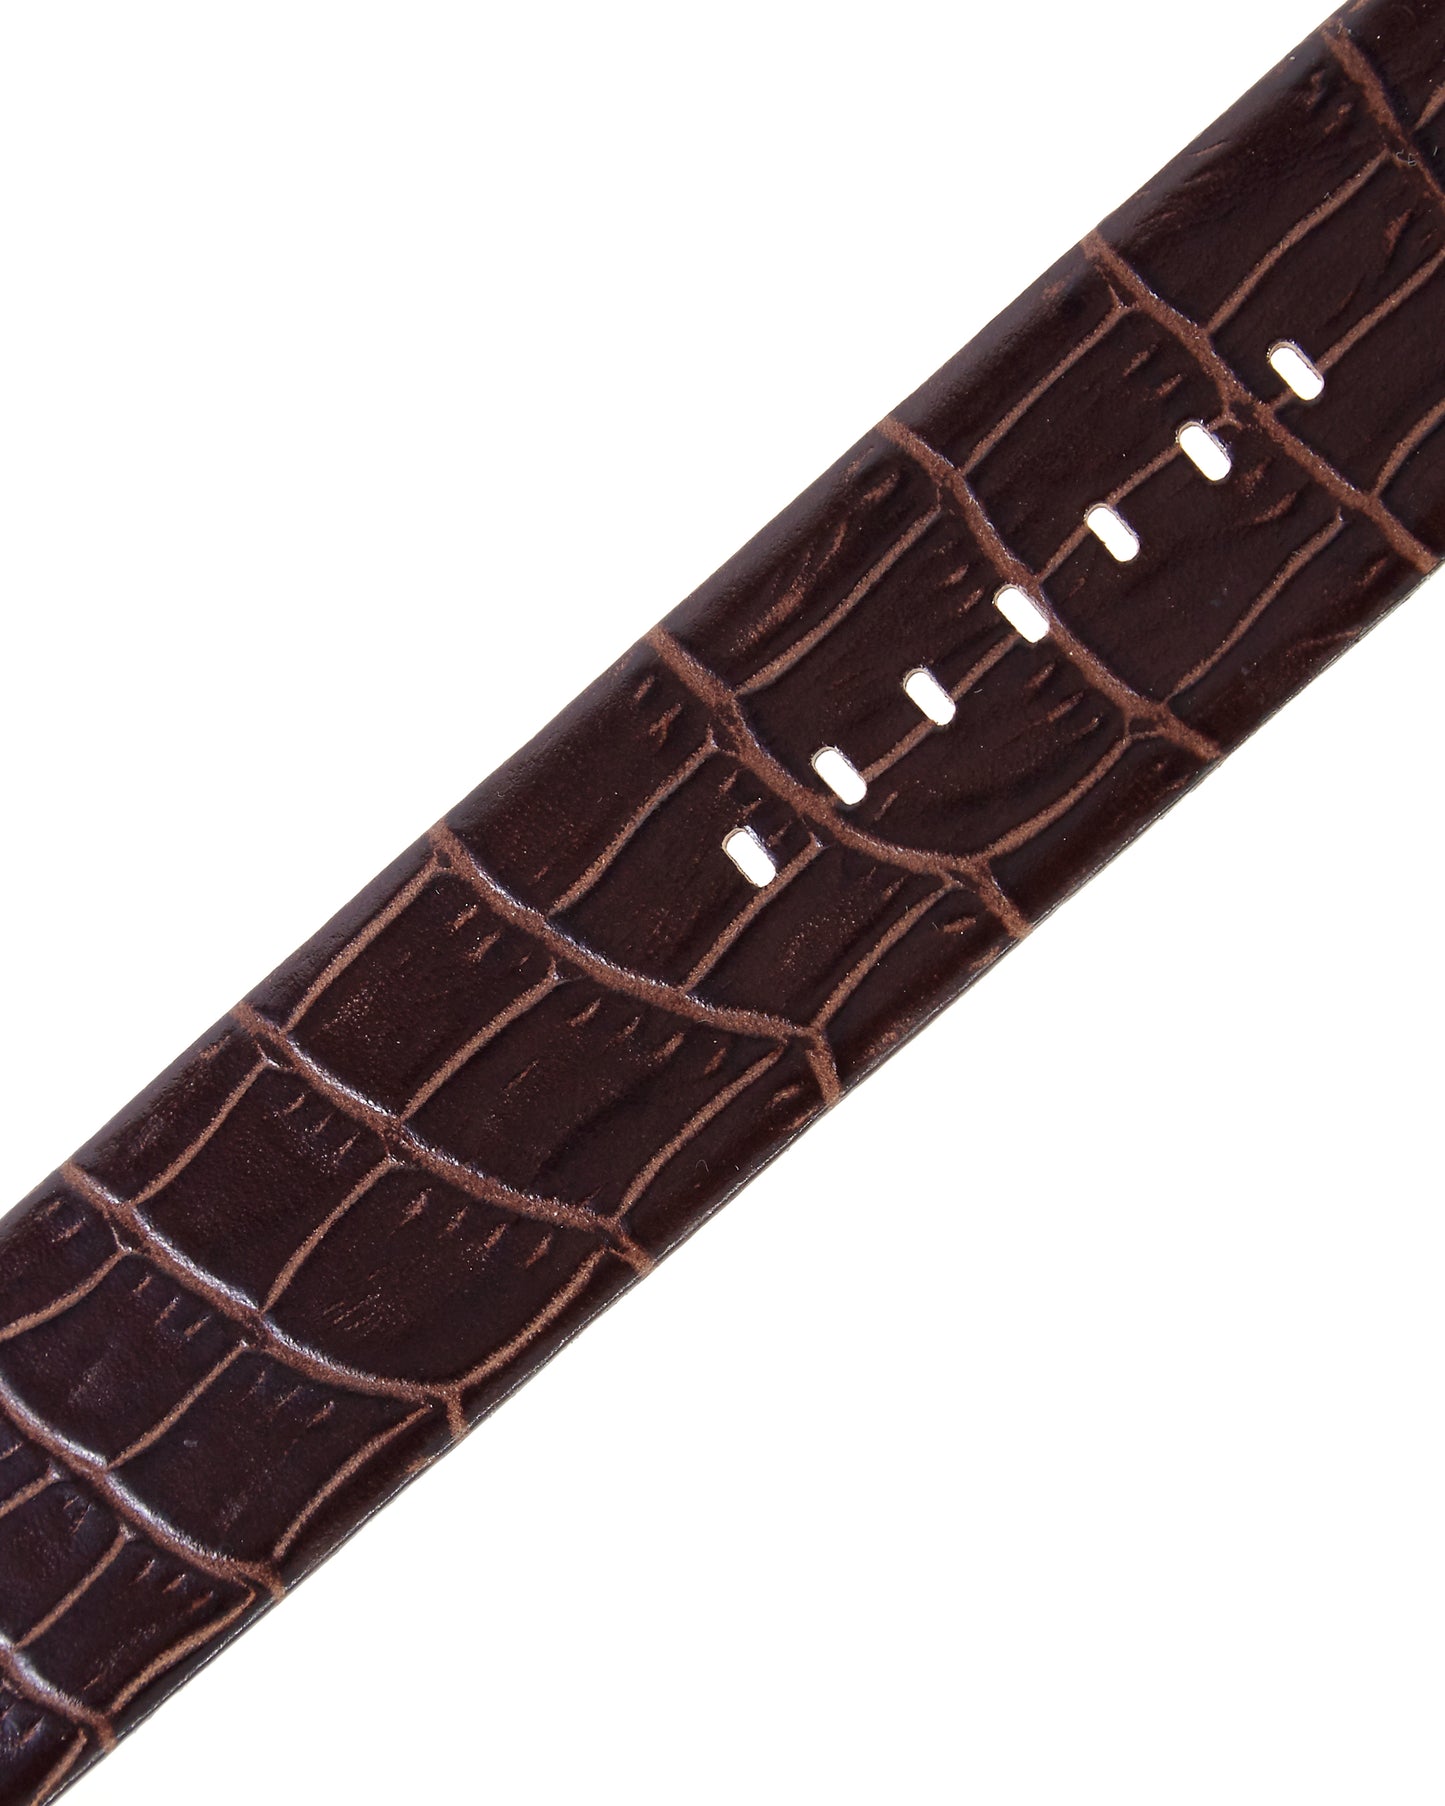 Ecclissi 22595 Brown Leather One Piece Strap 28mm x 28mm